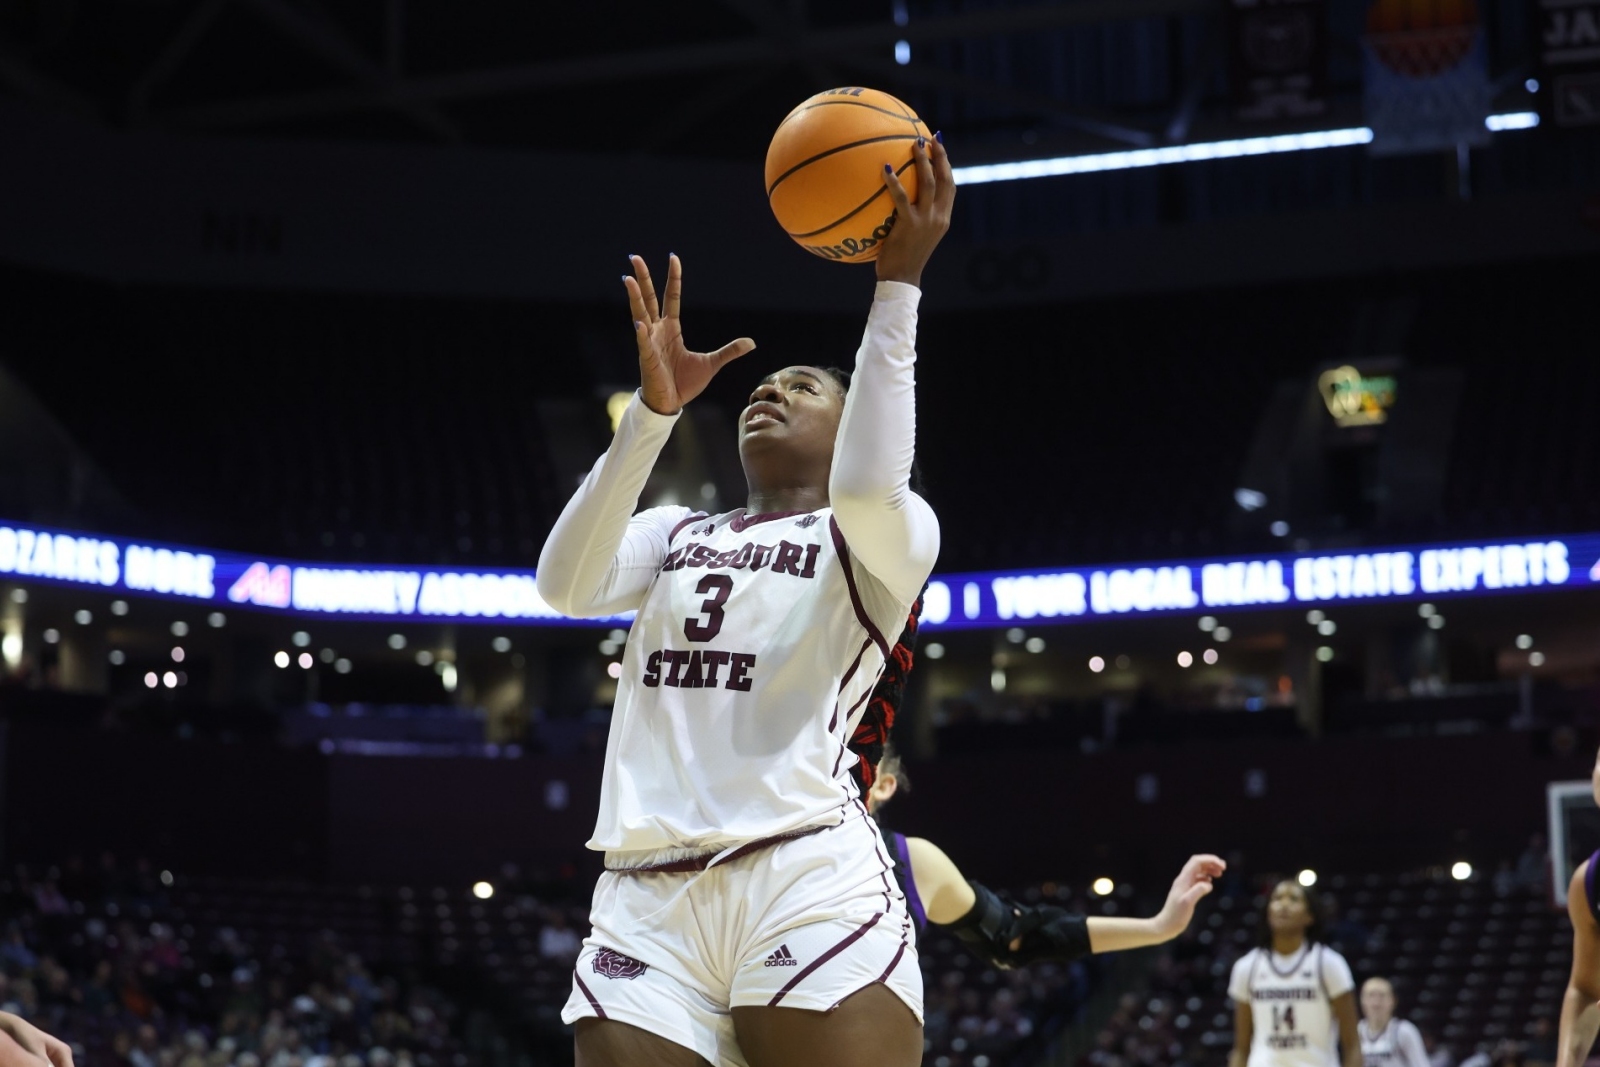 Kennedy Taylor, wearing a Missouri State Lady Bears basketball uniform, shoots the ball during a game.